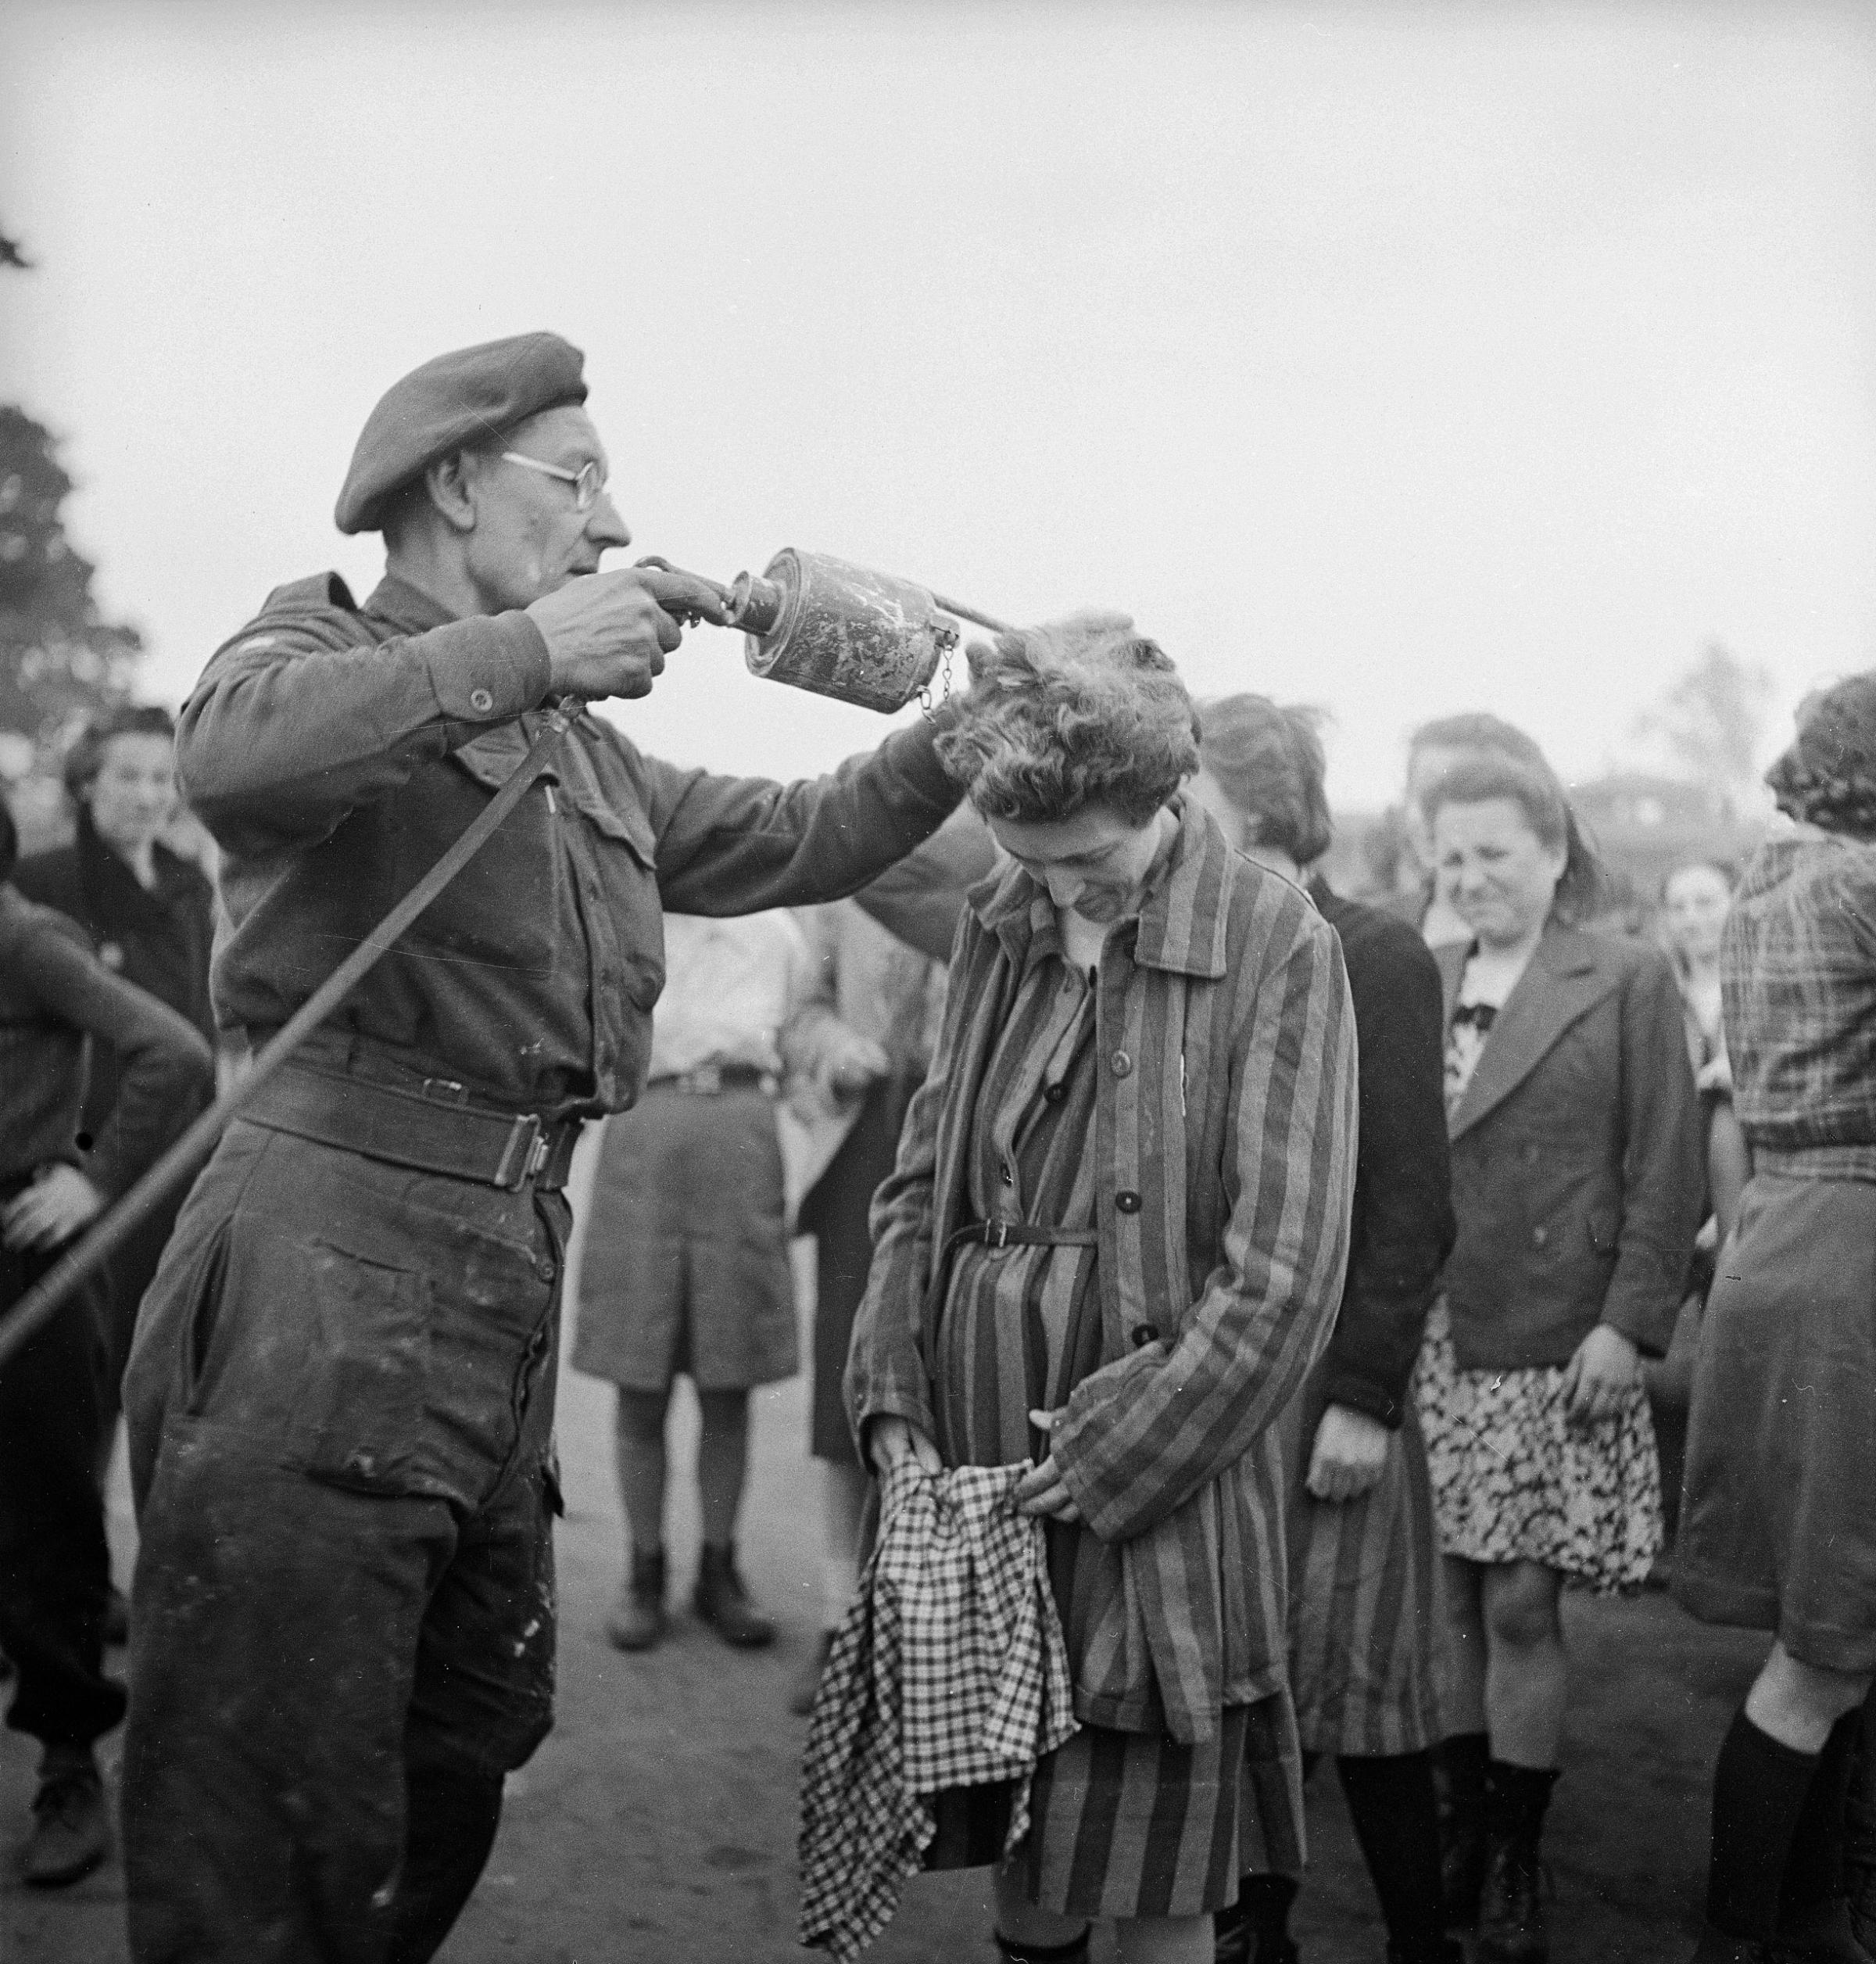 A British doctor uses DDT while delousing newly freed female prisoners at the Bergen-Belsen concentration camp, 1945.